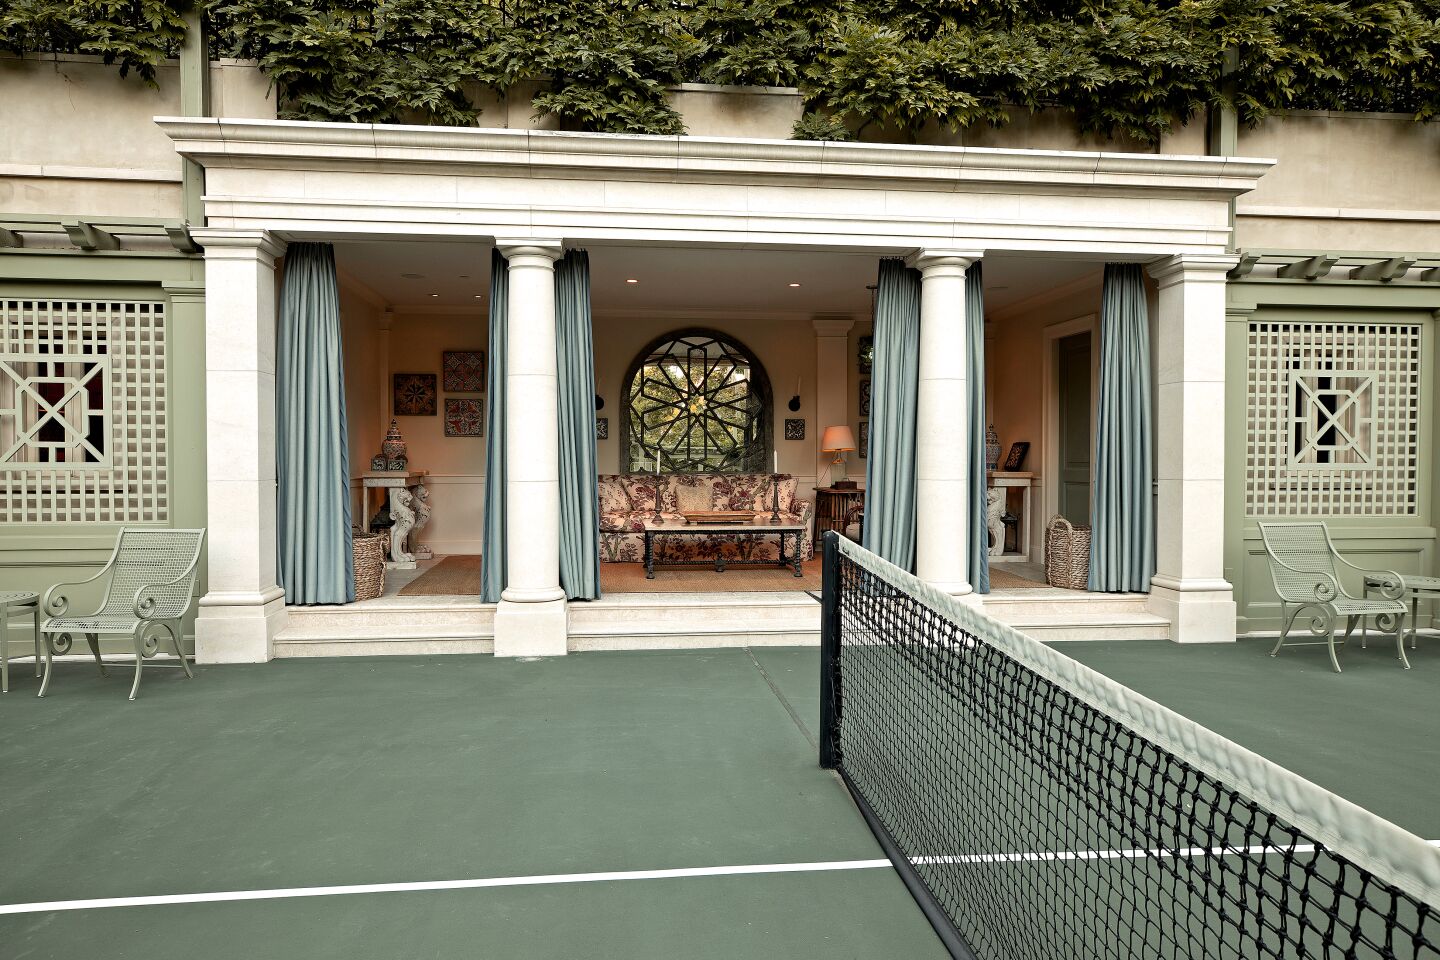 Tennis court with an open furnished room in the background.